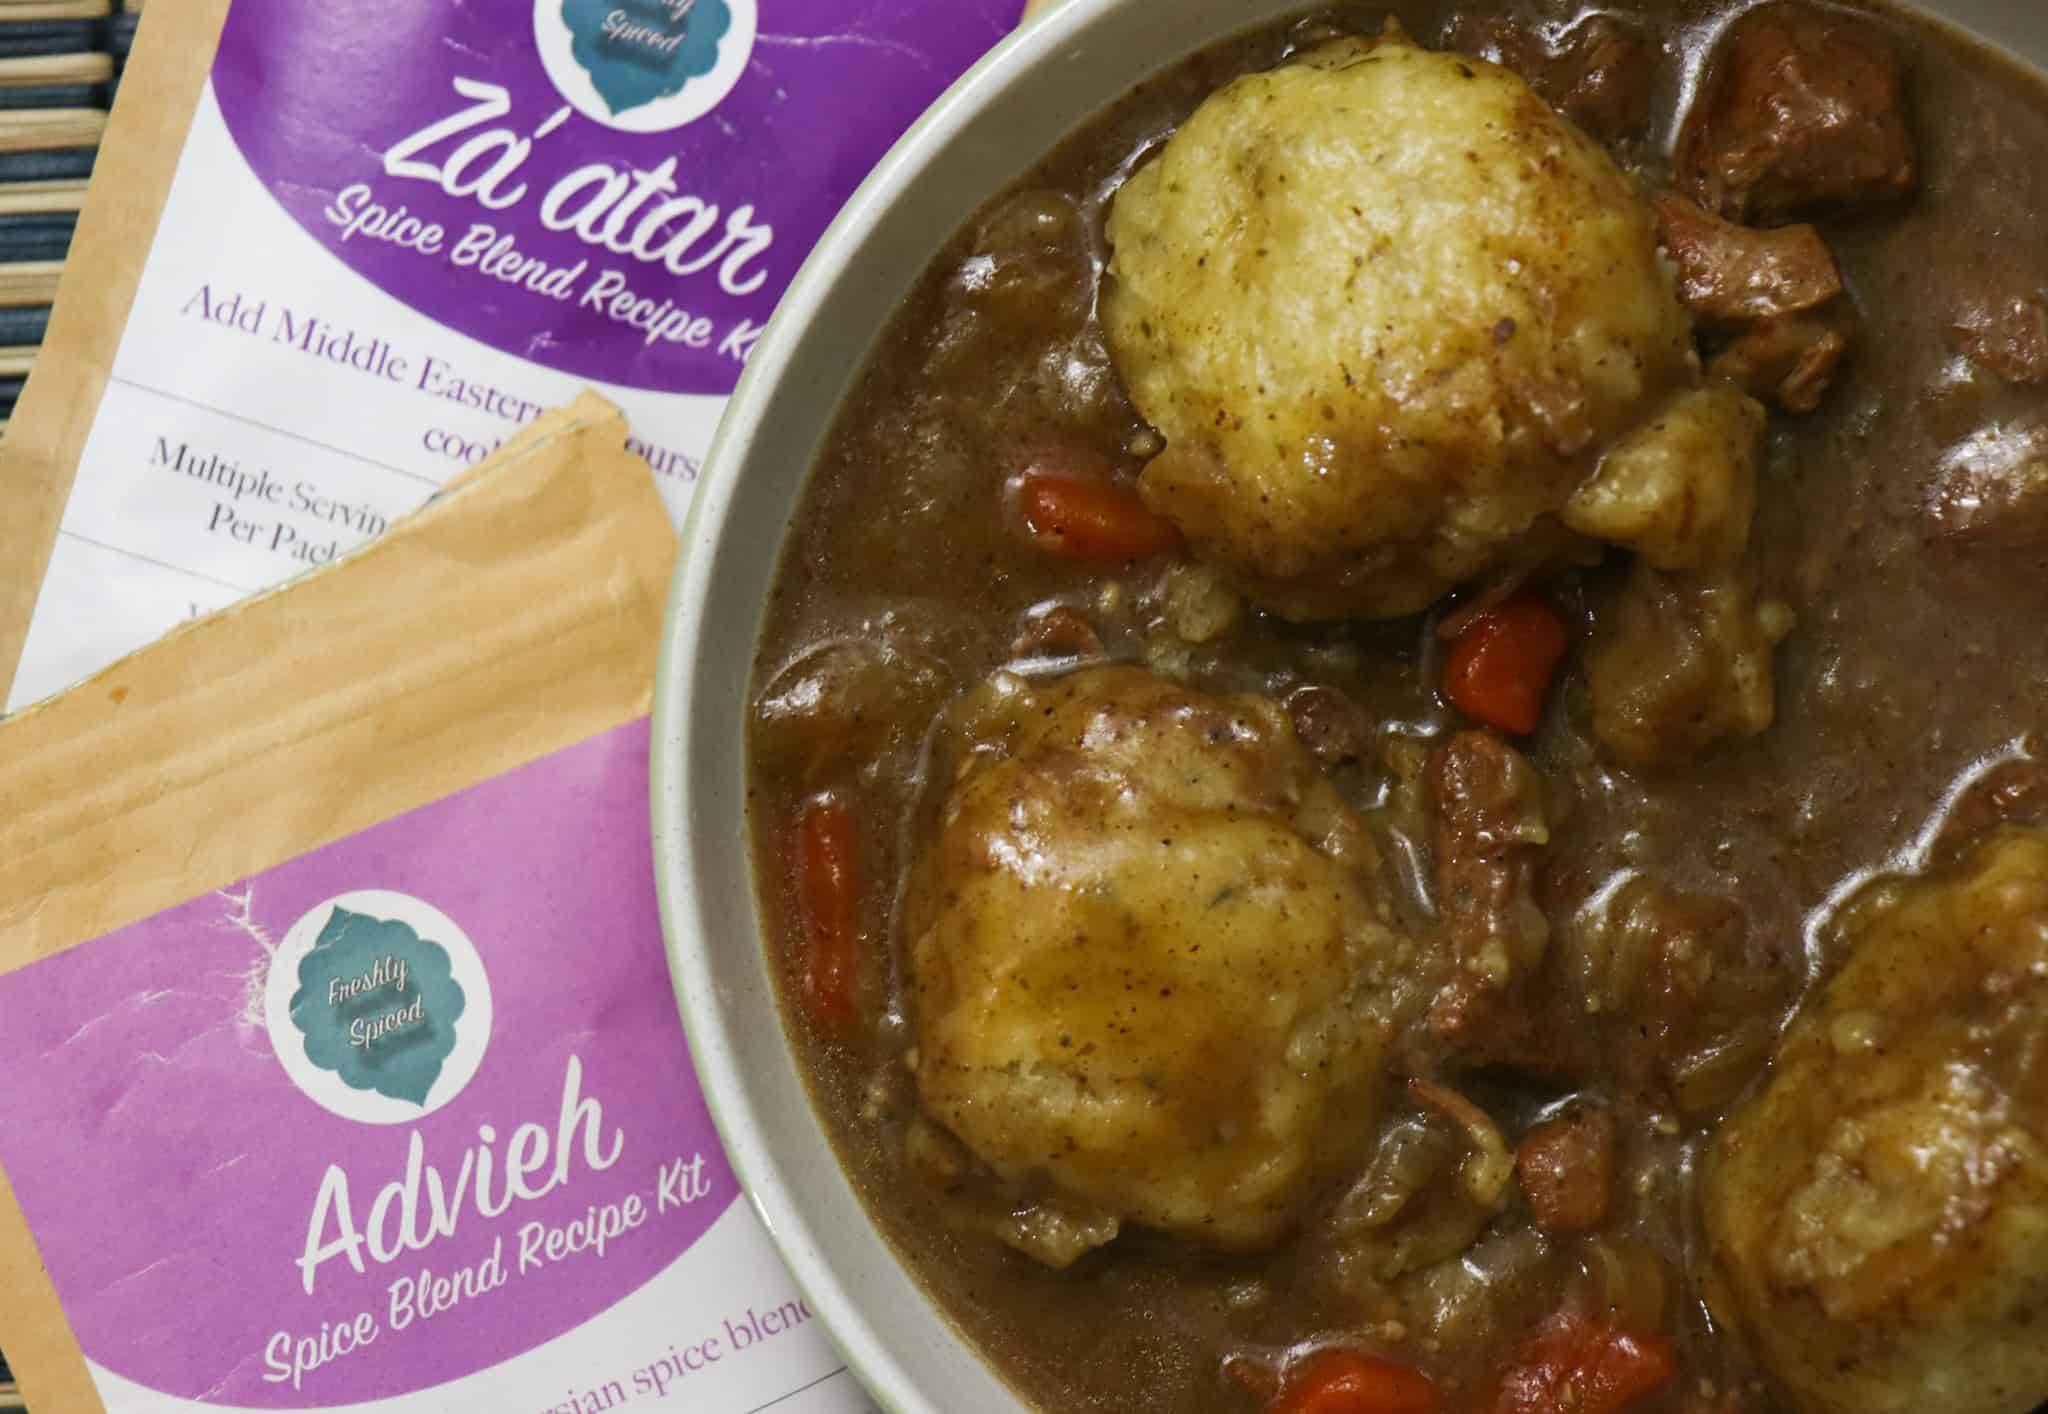 Middle Eastern Slow Cooked Lamb Stew with Dumplings (Advieh and Za’atar Spice Blends)